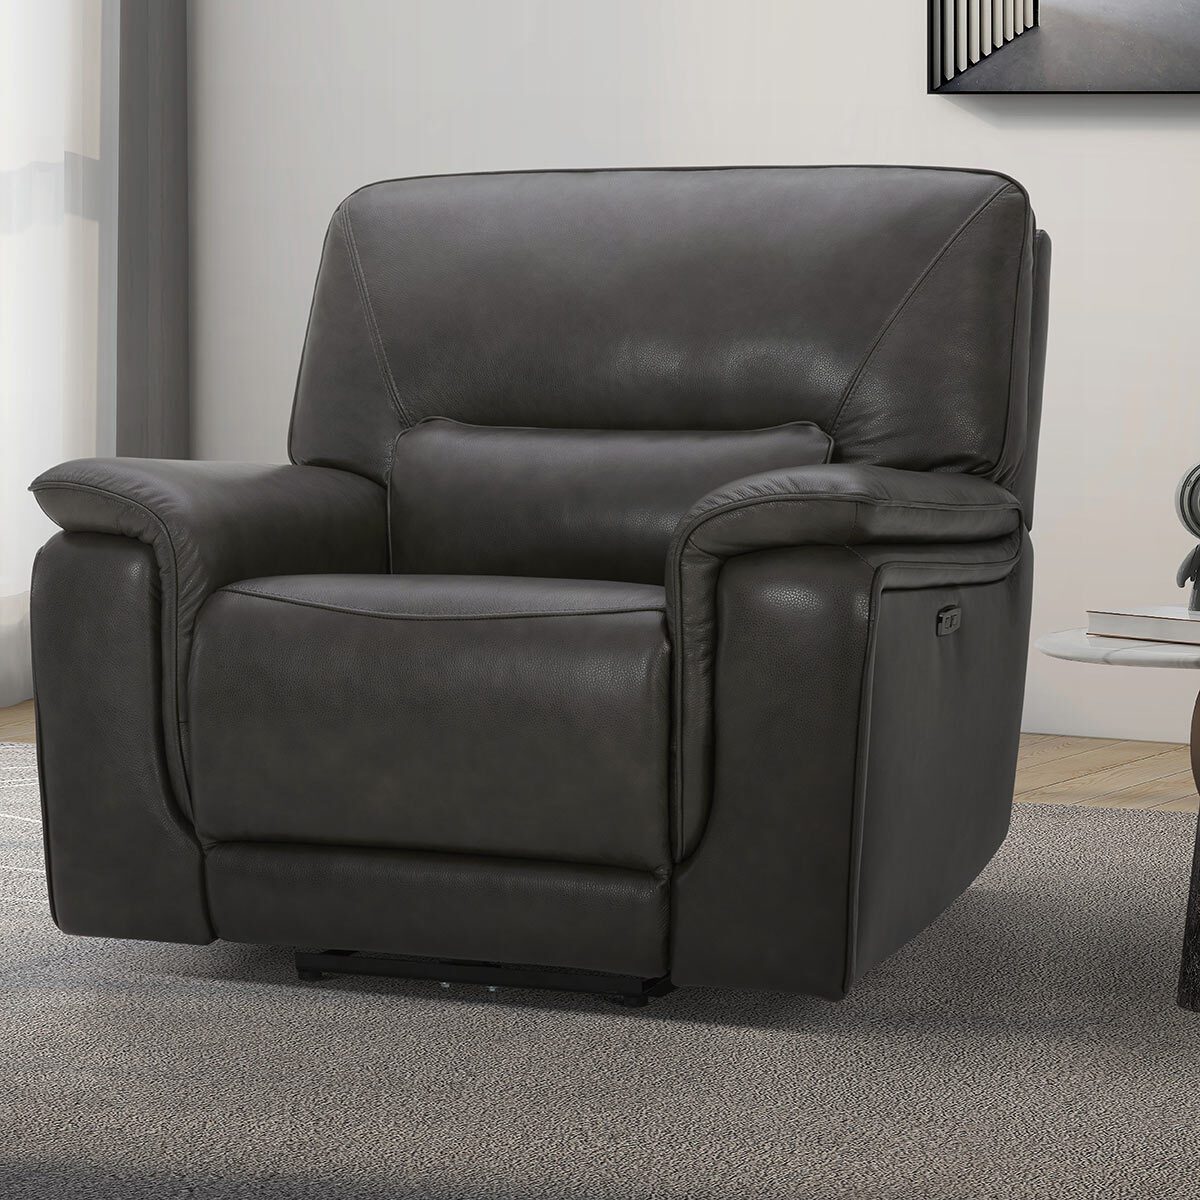 Gilman Creek Maxwell Grey Leather Power Recliner Armchair With Power Headrest - Signature Retail Stores